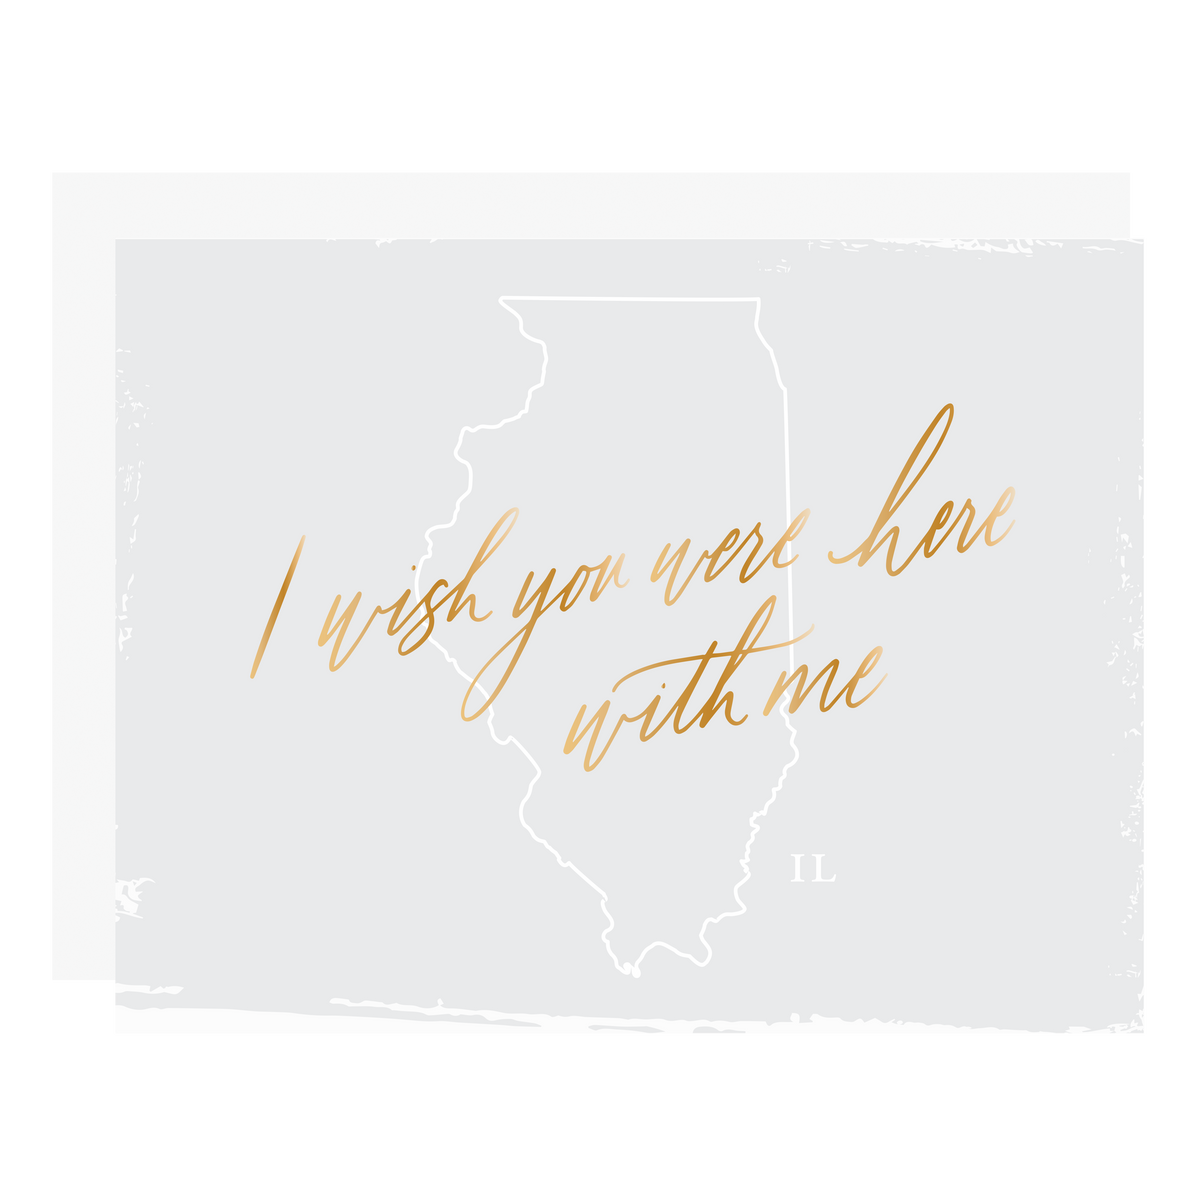 &quot;Wish You Were Here With Me - Illinois&quot;, letterpress printed by hand with gold foil. 